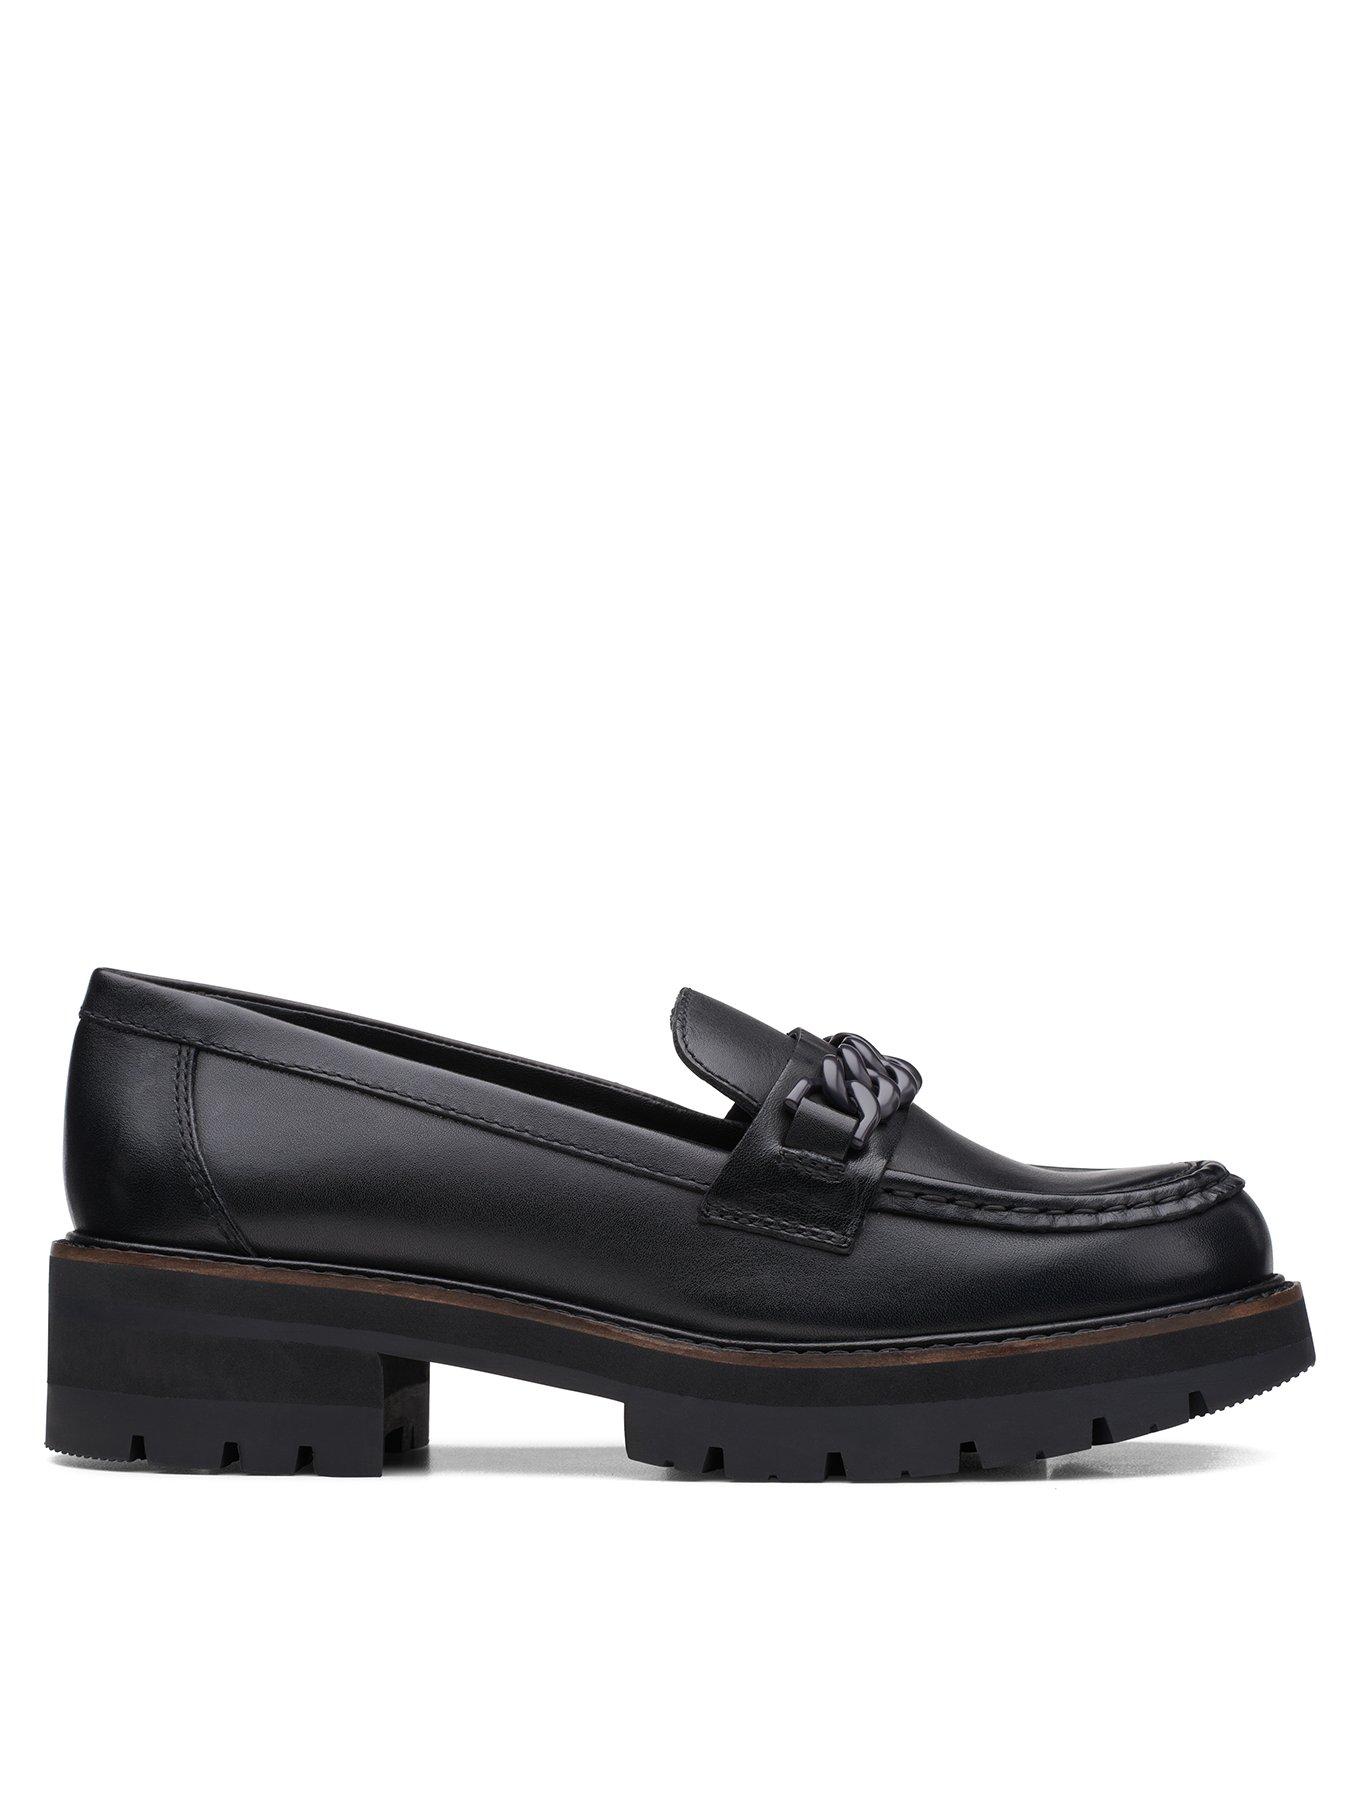 Clarks Orianna Edge Leather Loafer | very.co.uk